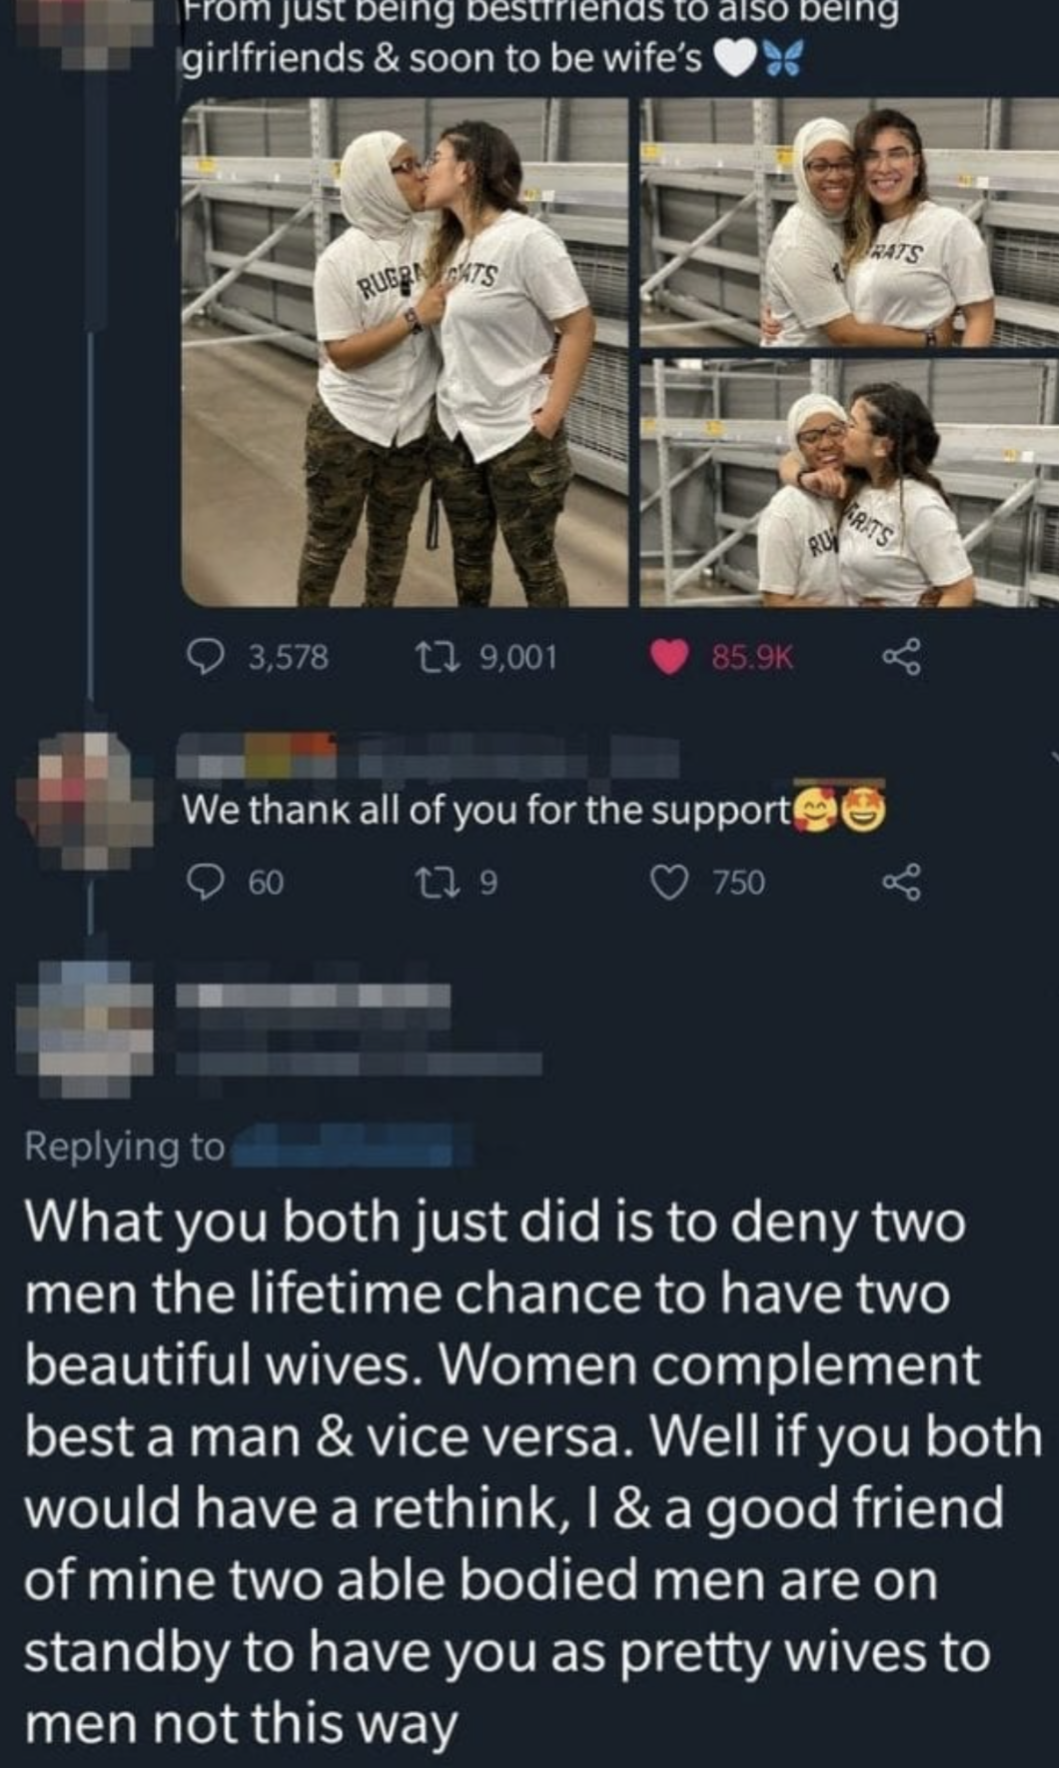 cringe - cringetopia - someone straight - being girlfriends & soon to be wife's 3,578 17 9.001 We thank all of you for the supported 11 9 750 60 What you both just did is to deny two men the lifetime chance to have two beautiful wives. Women complement be